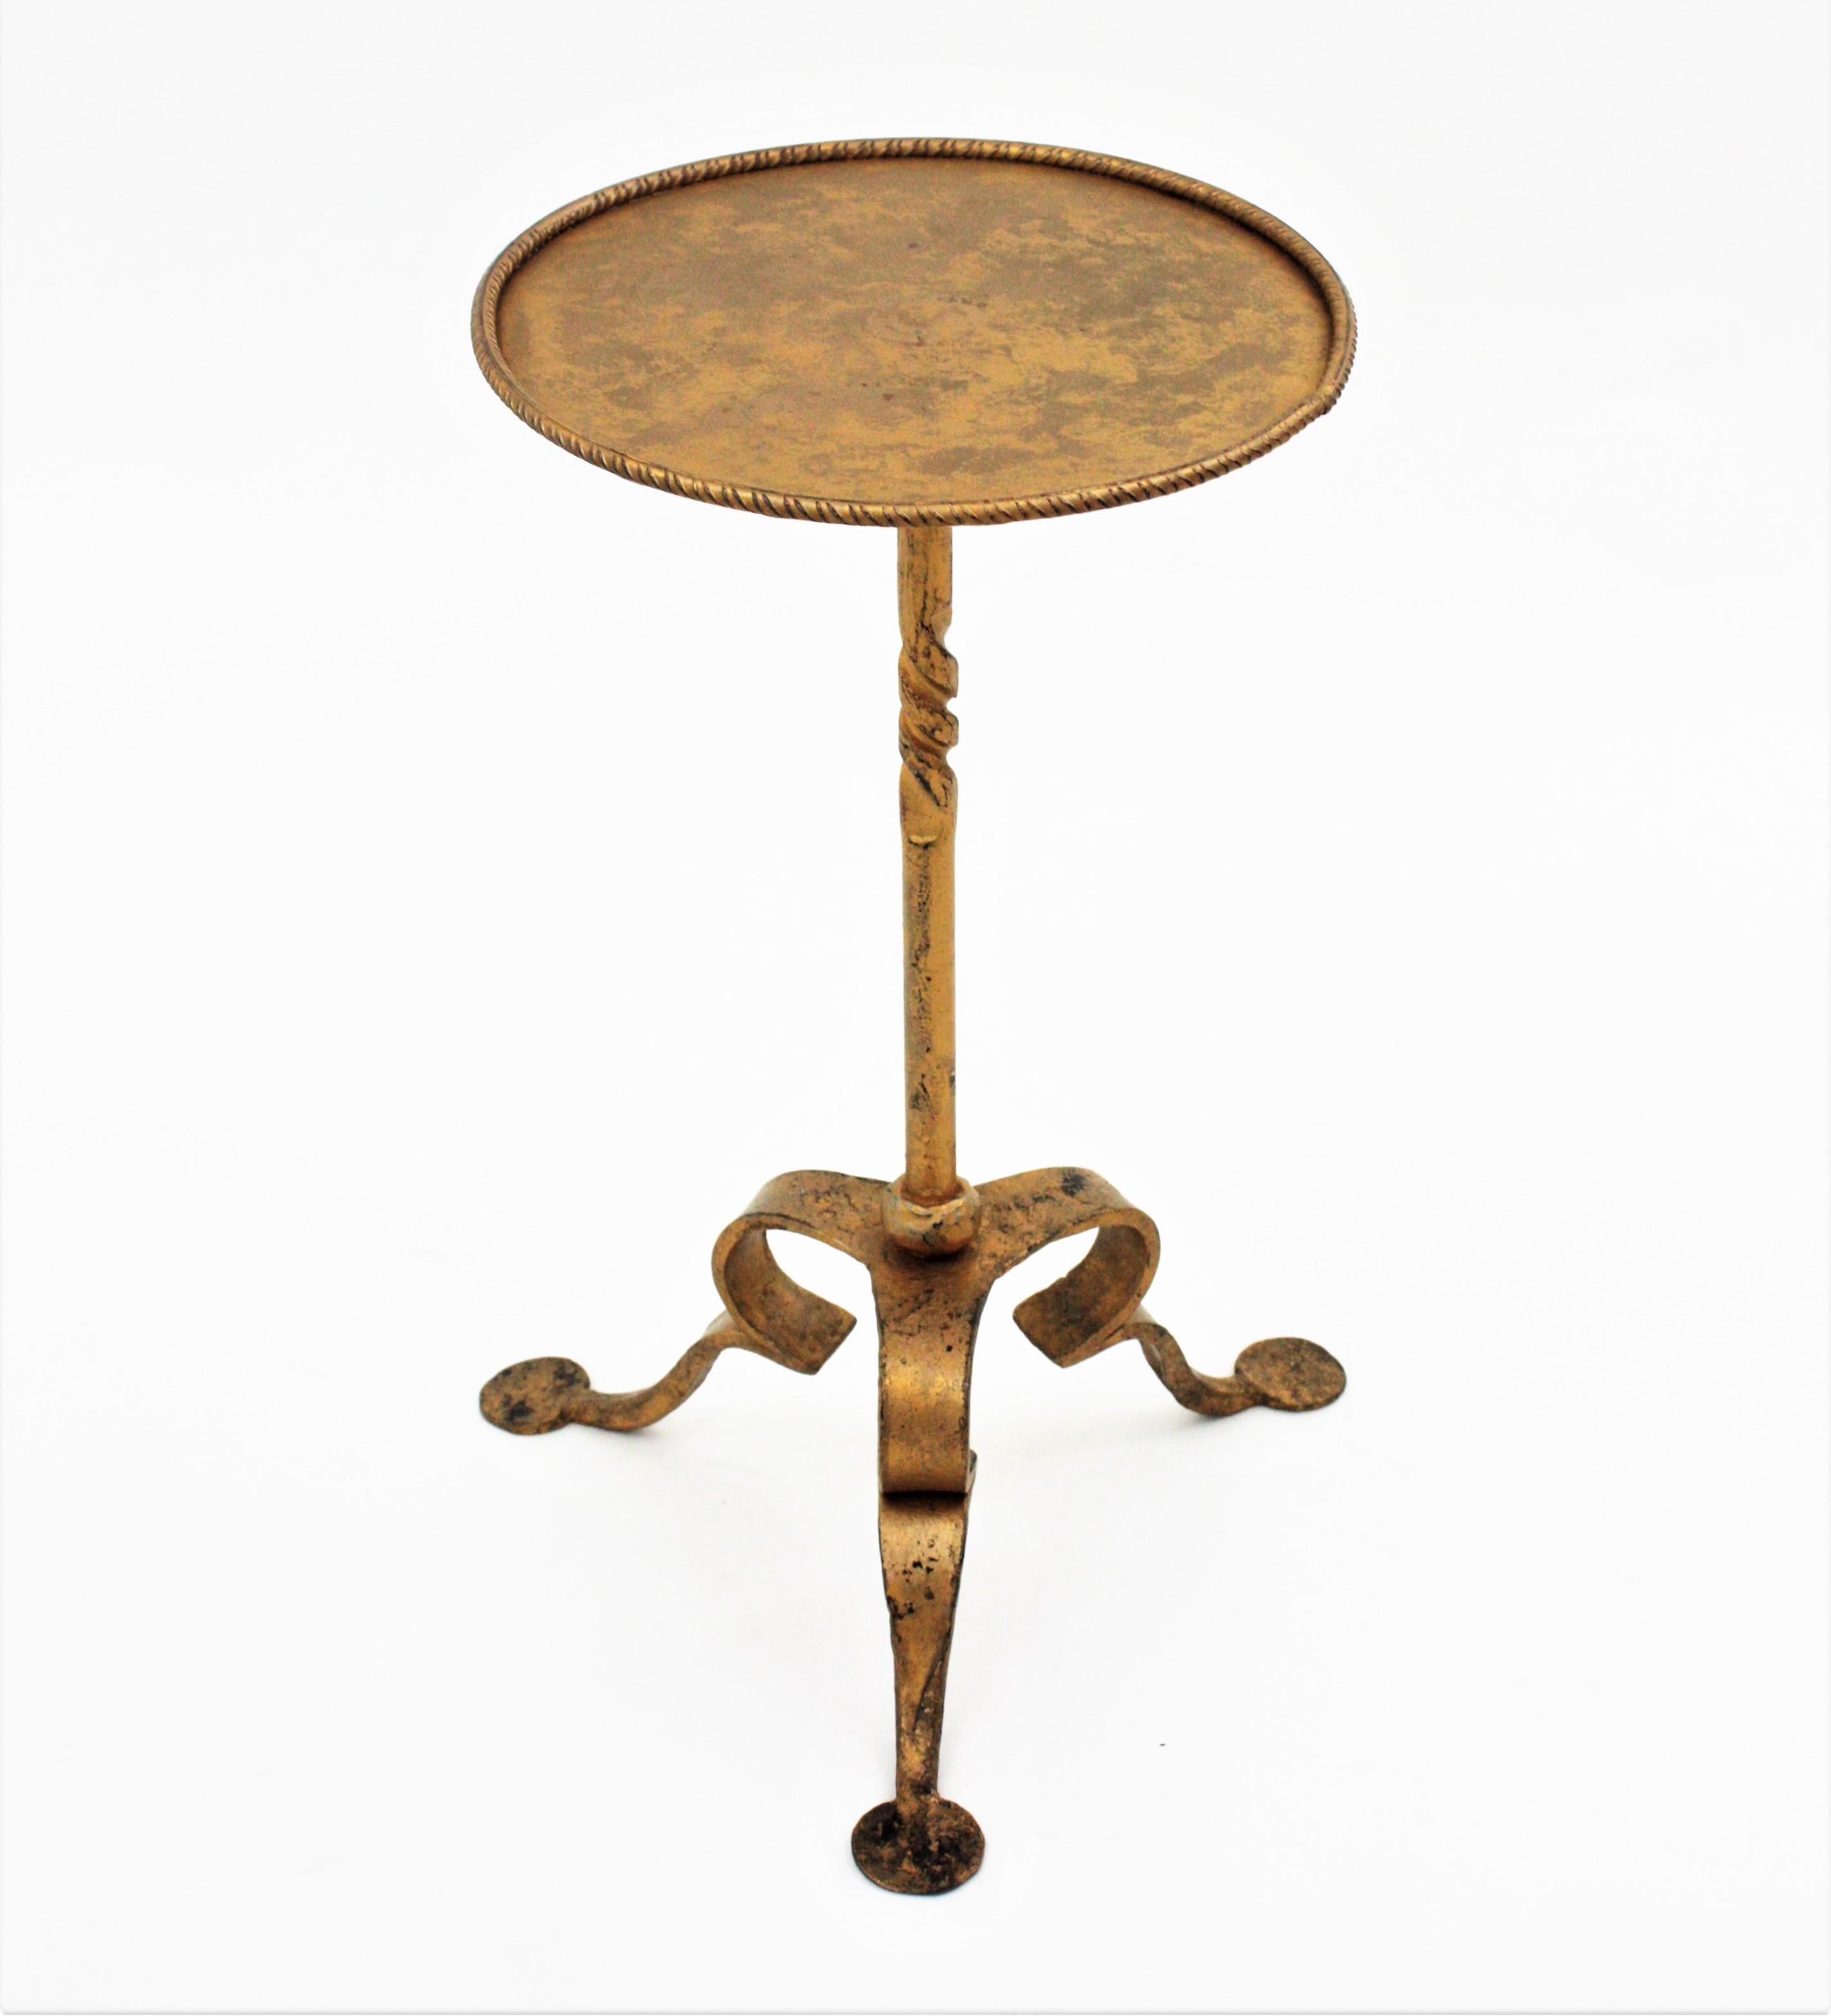 Spanish Wrought Gilt Iron Side Table / Drinks Table / Martini Table, 1950s For Sale 4